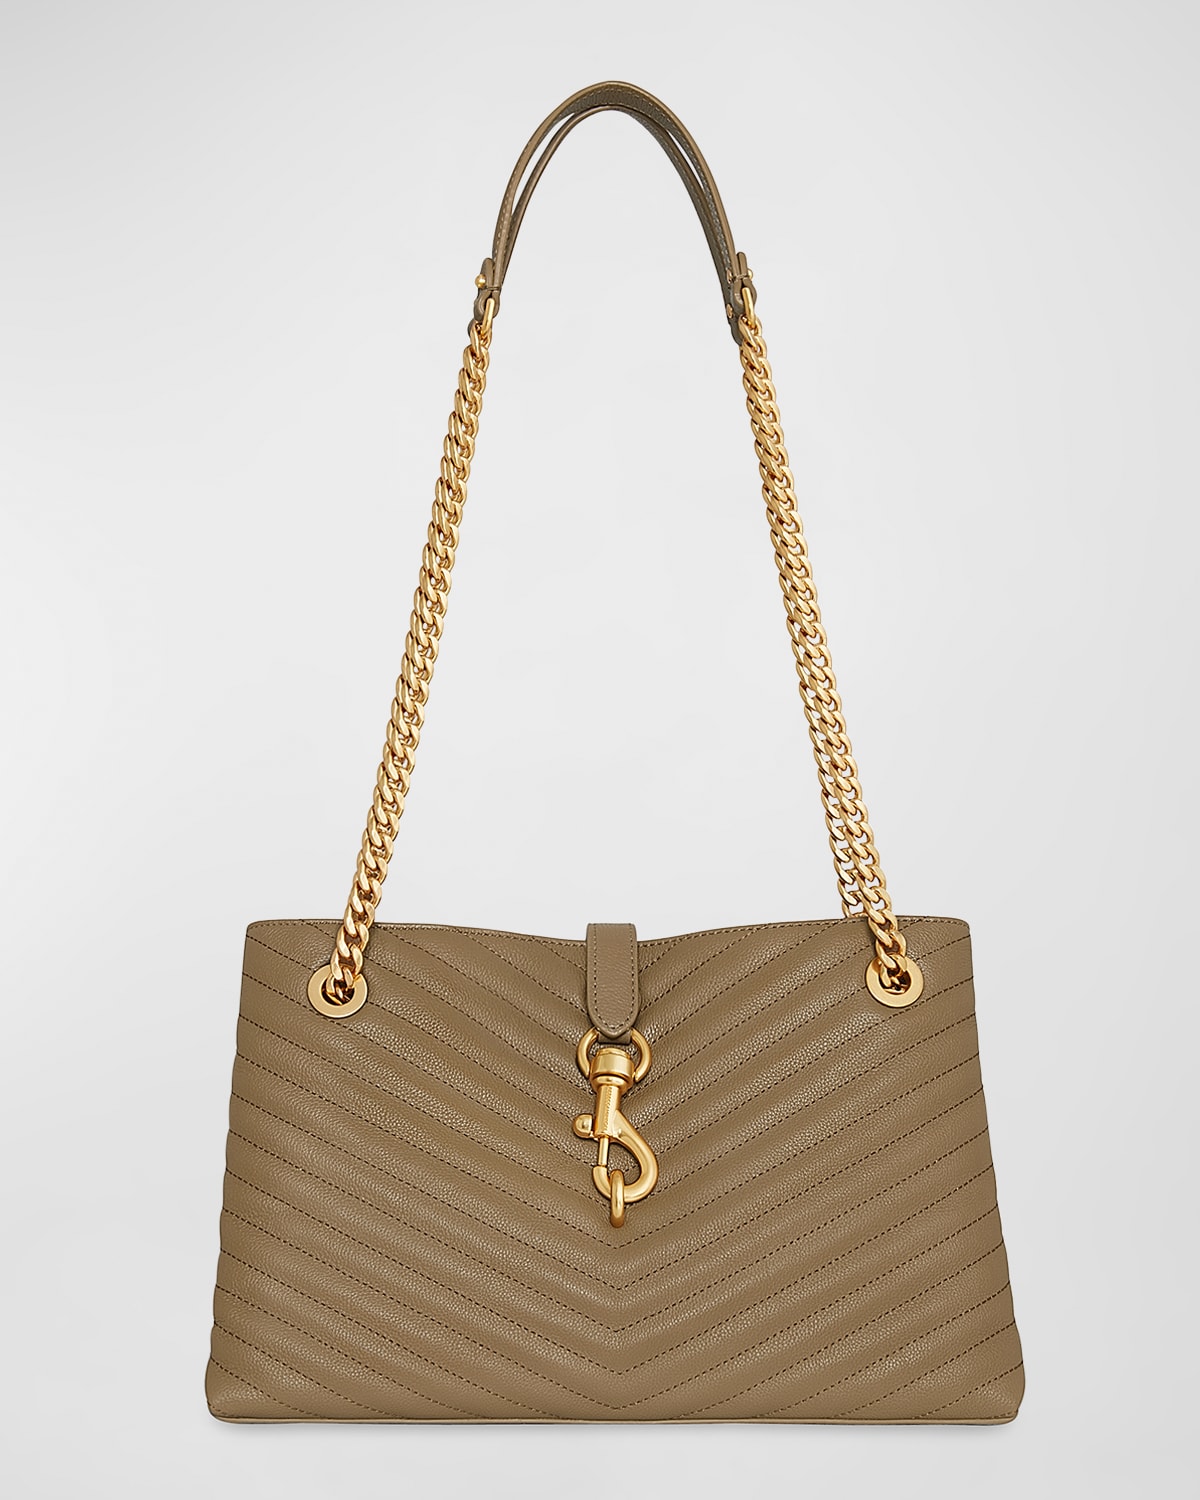 REBECCA MINKOFF EDIE QUILTED LEATHER TOTE BAG